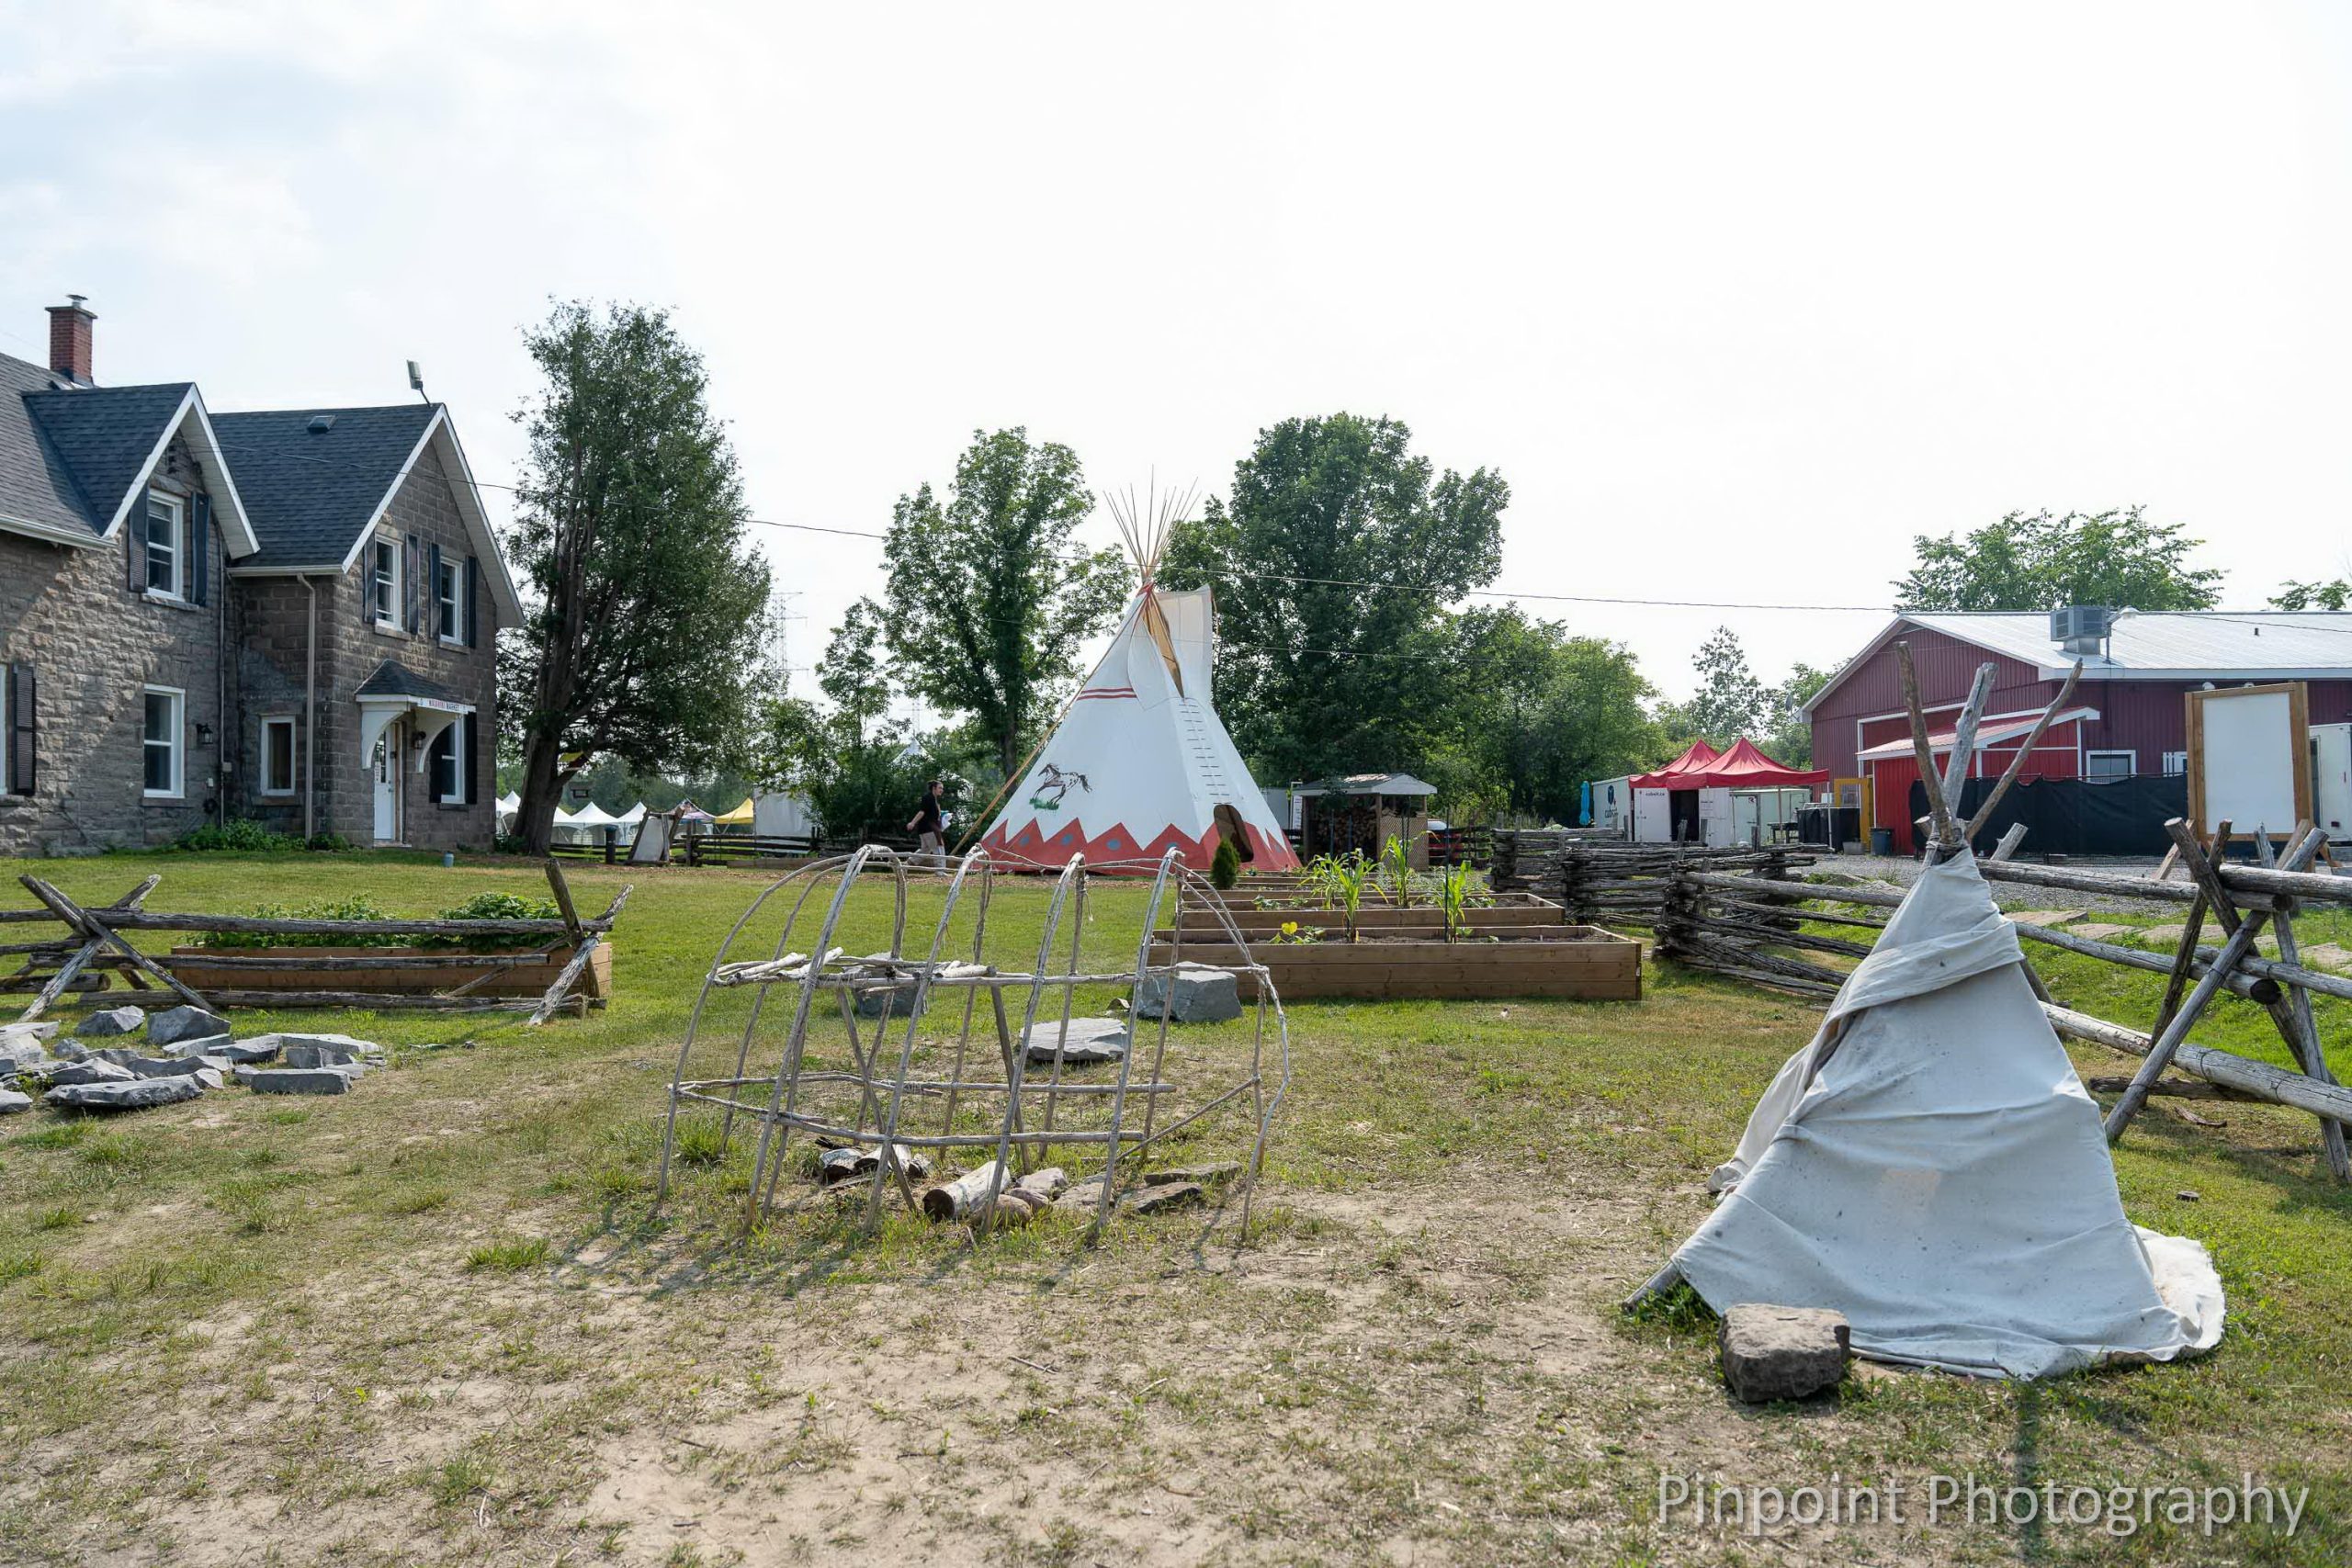 Field with tipis and other wooden structures